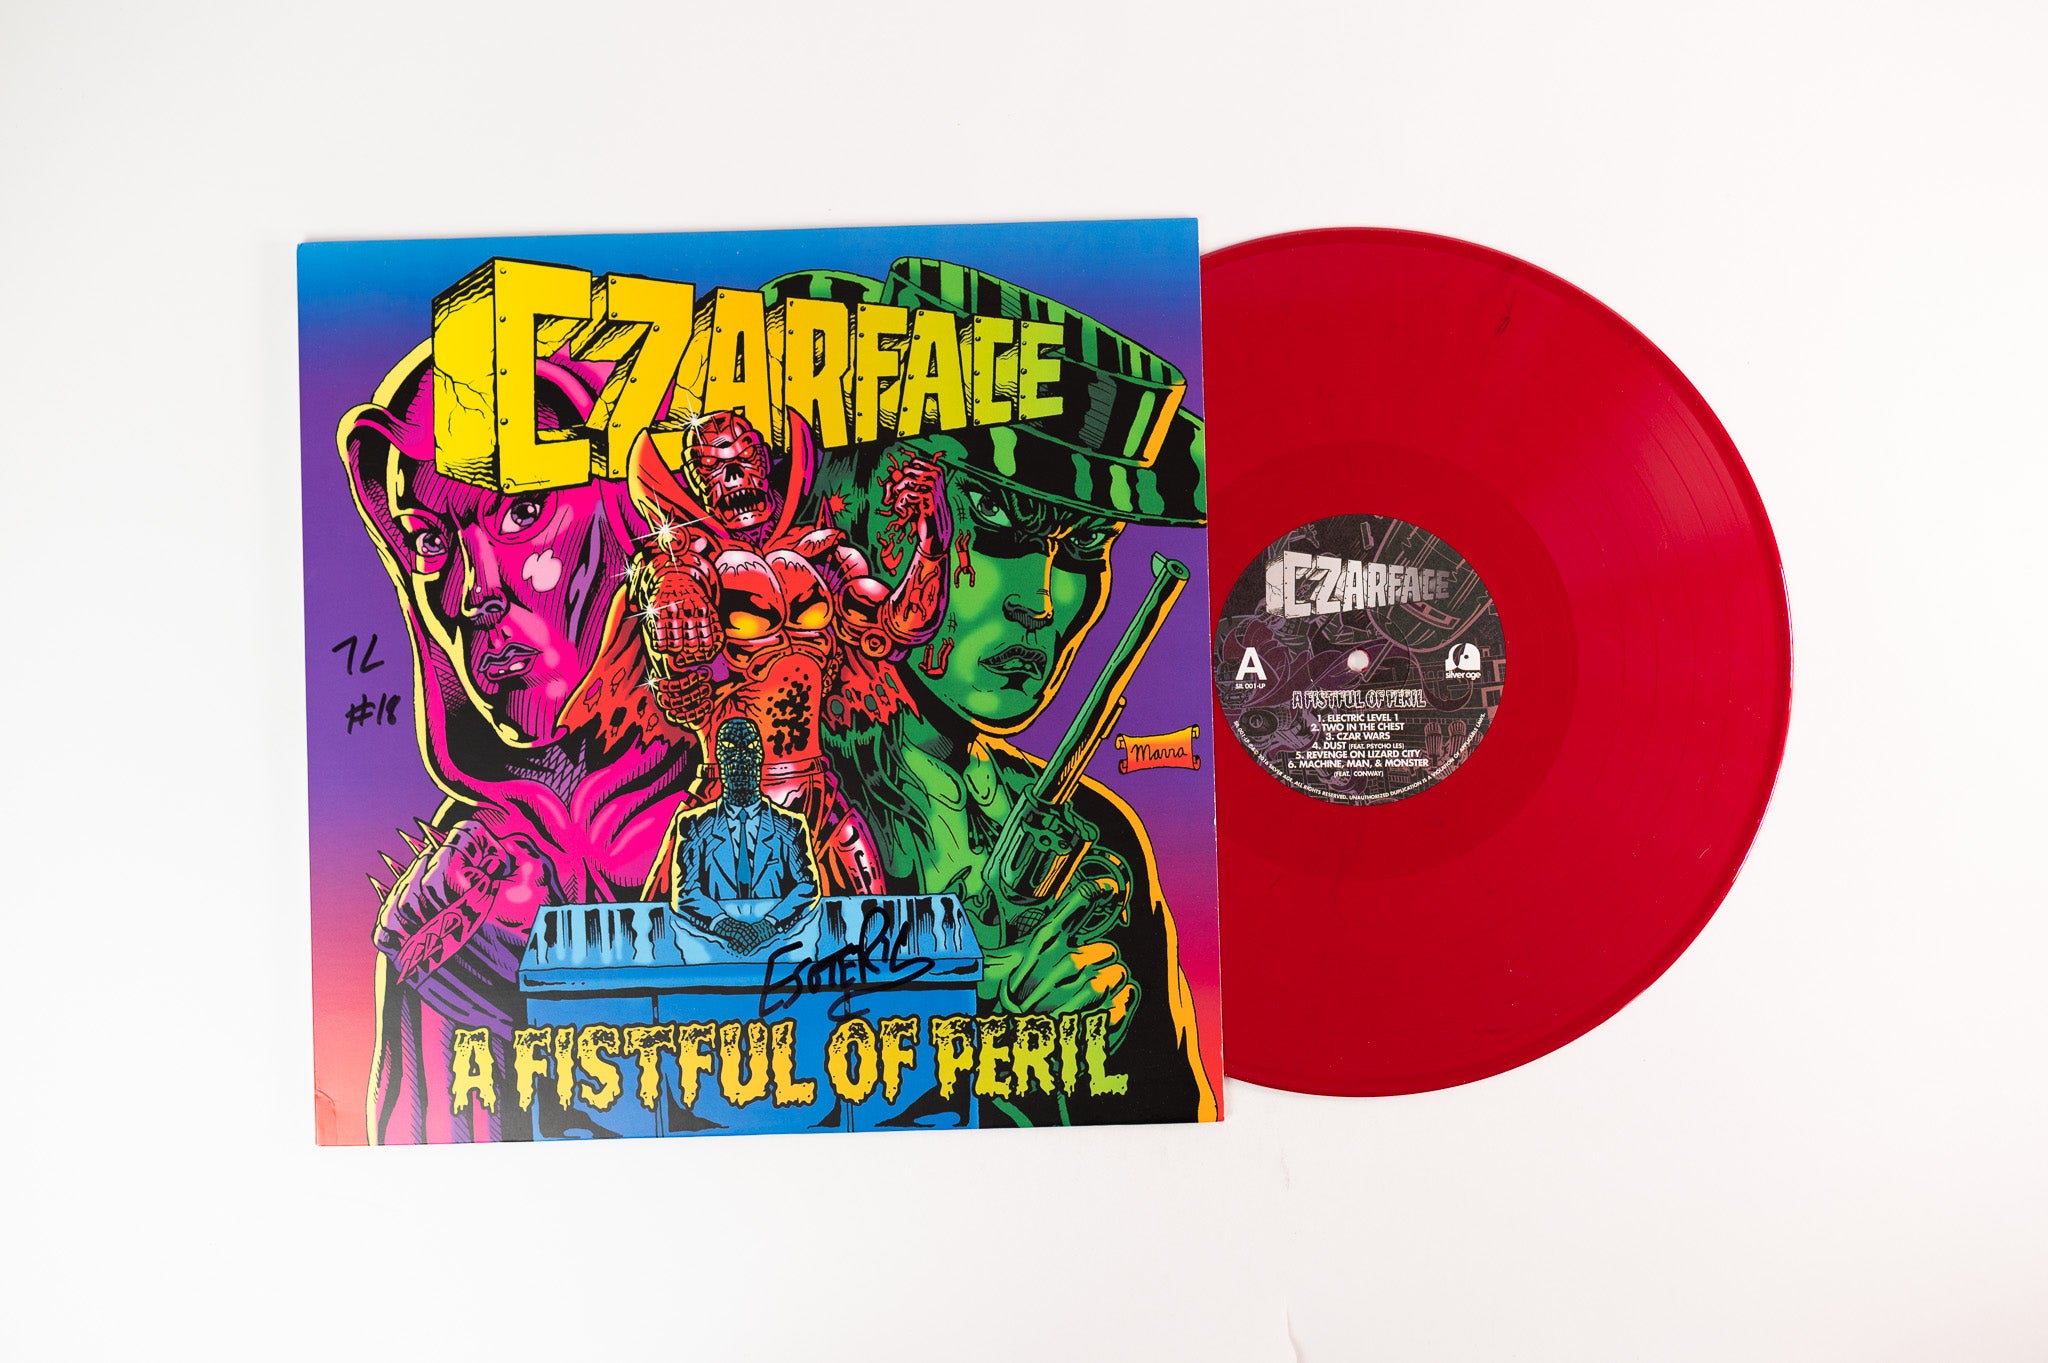 Czarface - A Fistful Of Peril on Silver Age Limited Red Vinyl